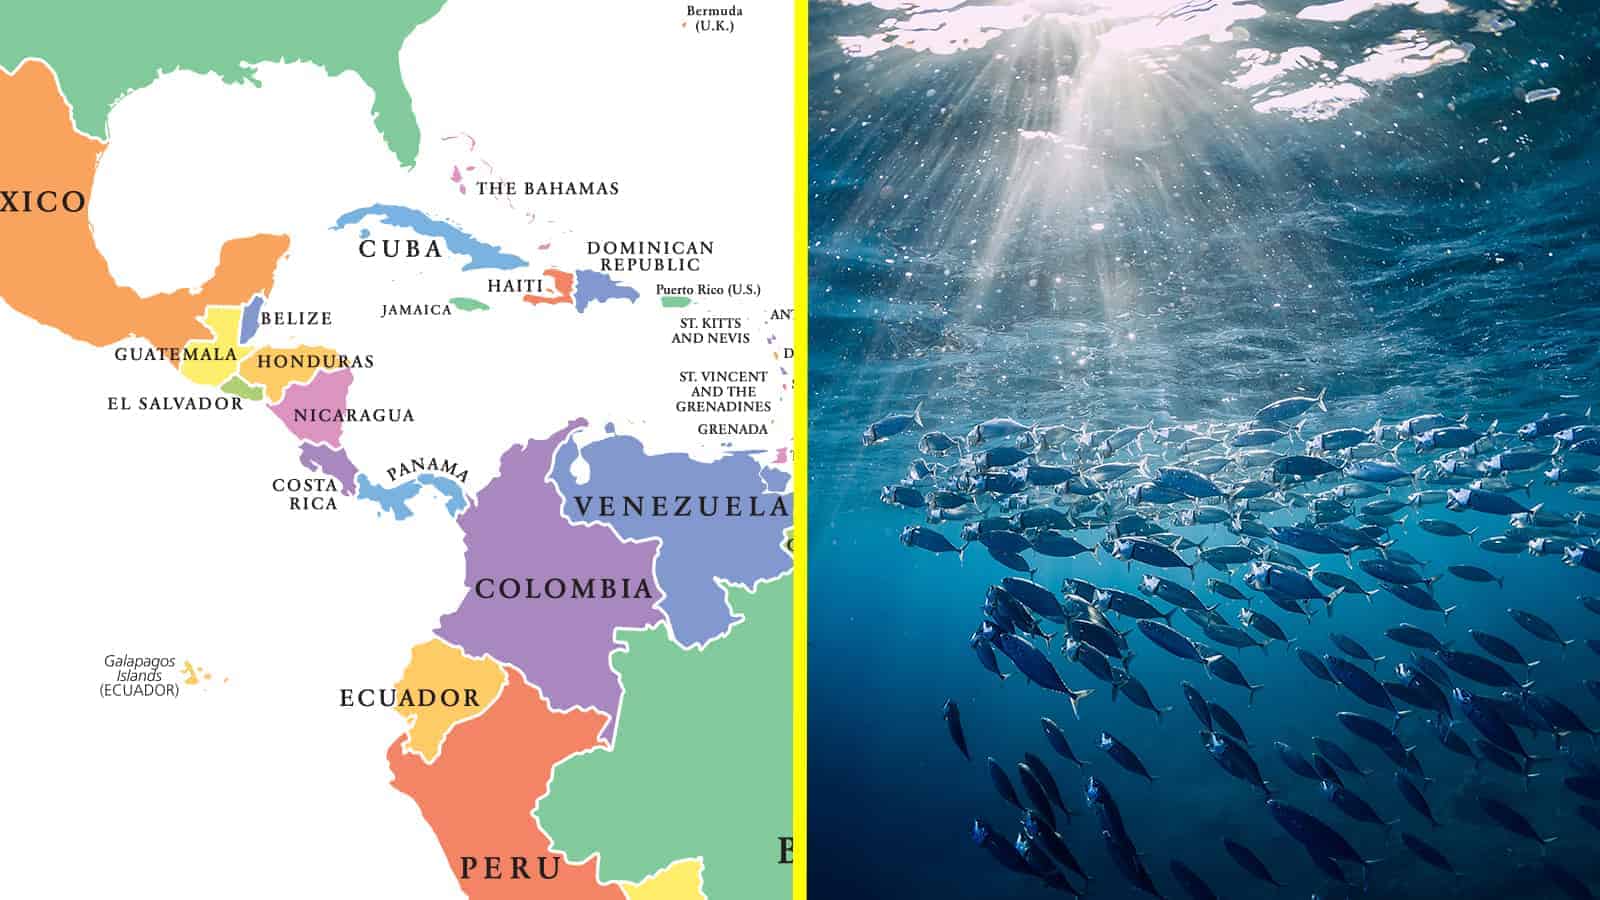 4 Latin American Countries Agree to Marine Life Protection Rules